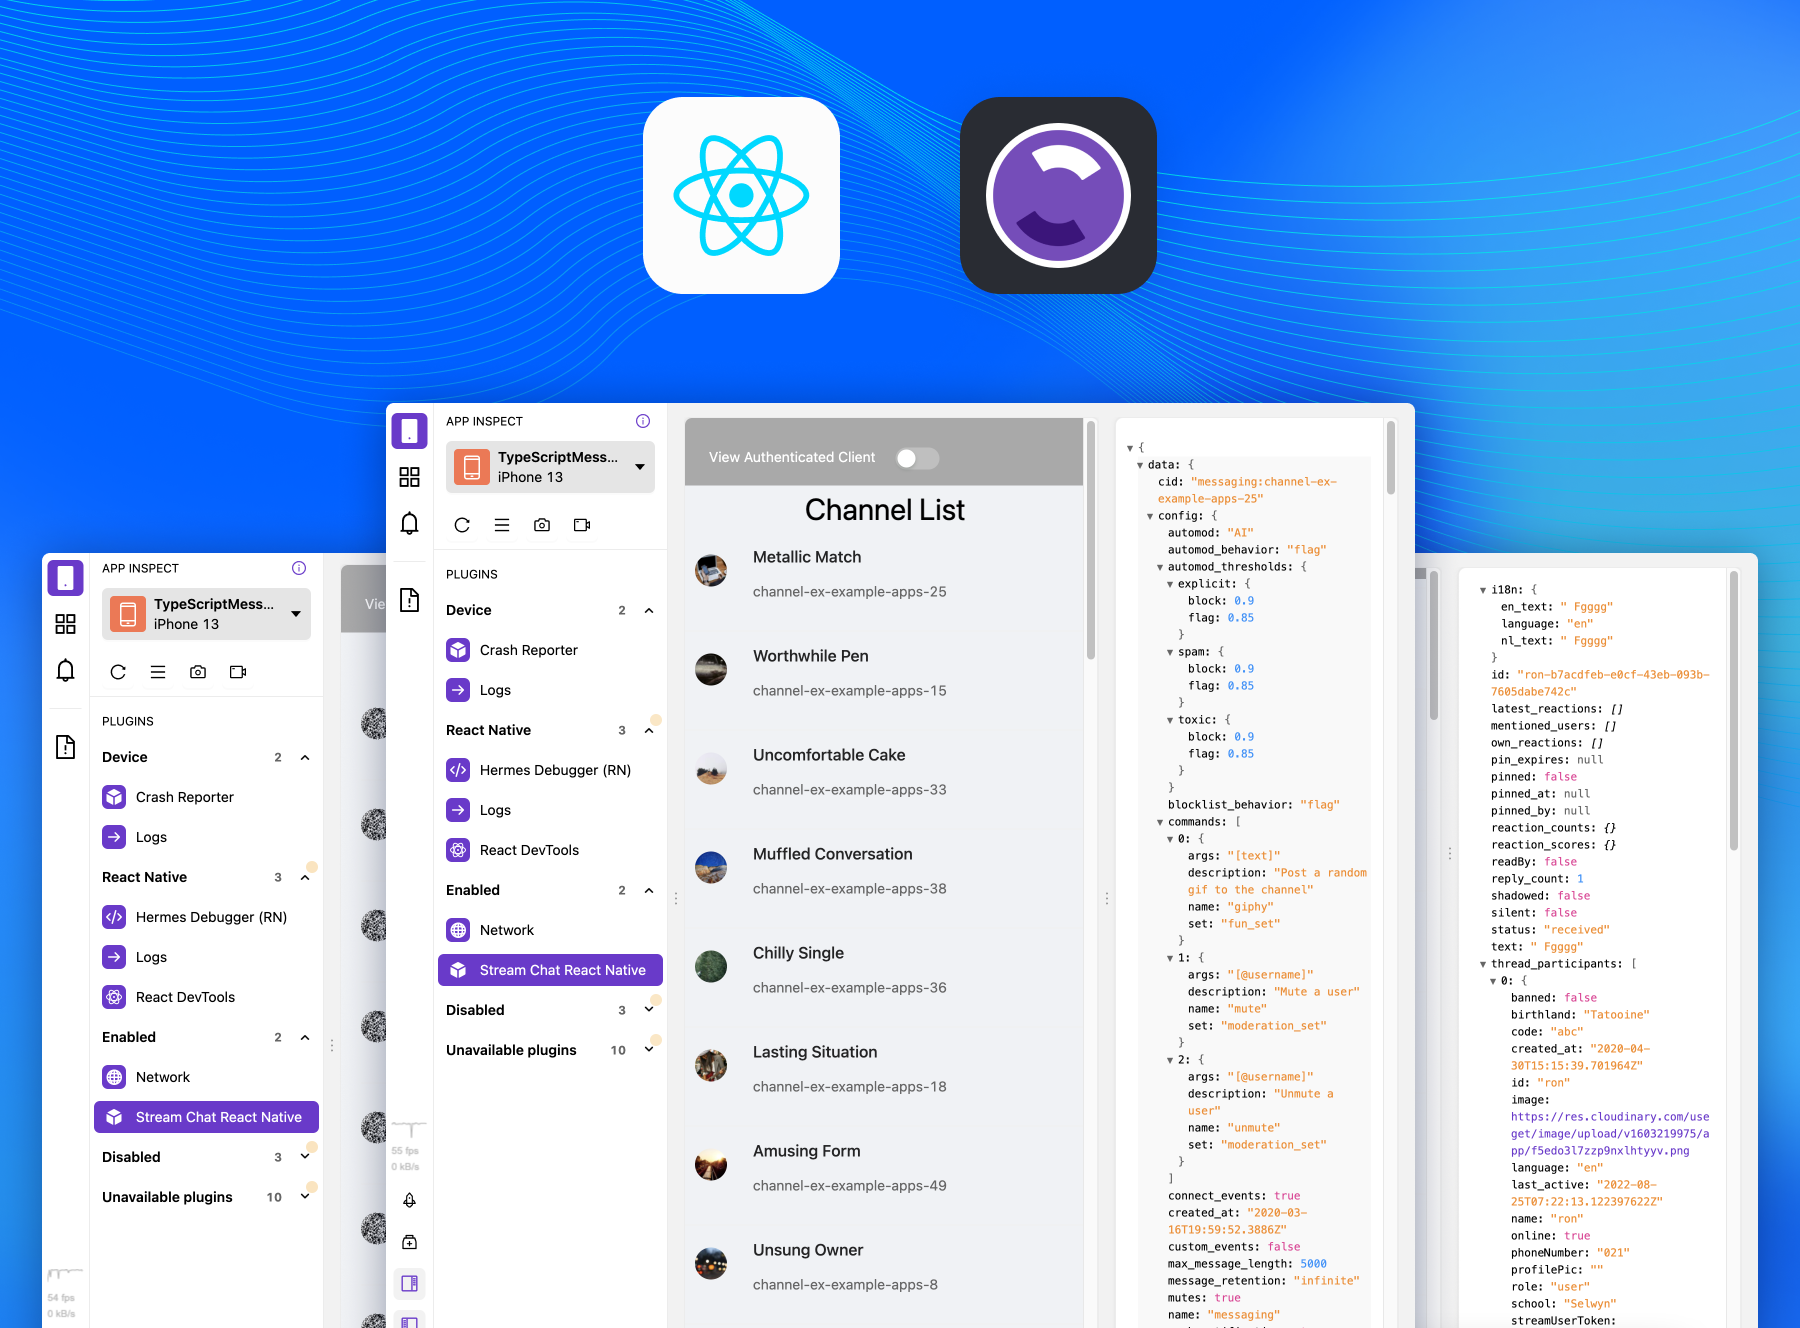 flipper_stream_chat_react_native_banner.png